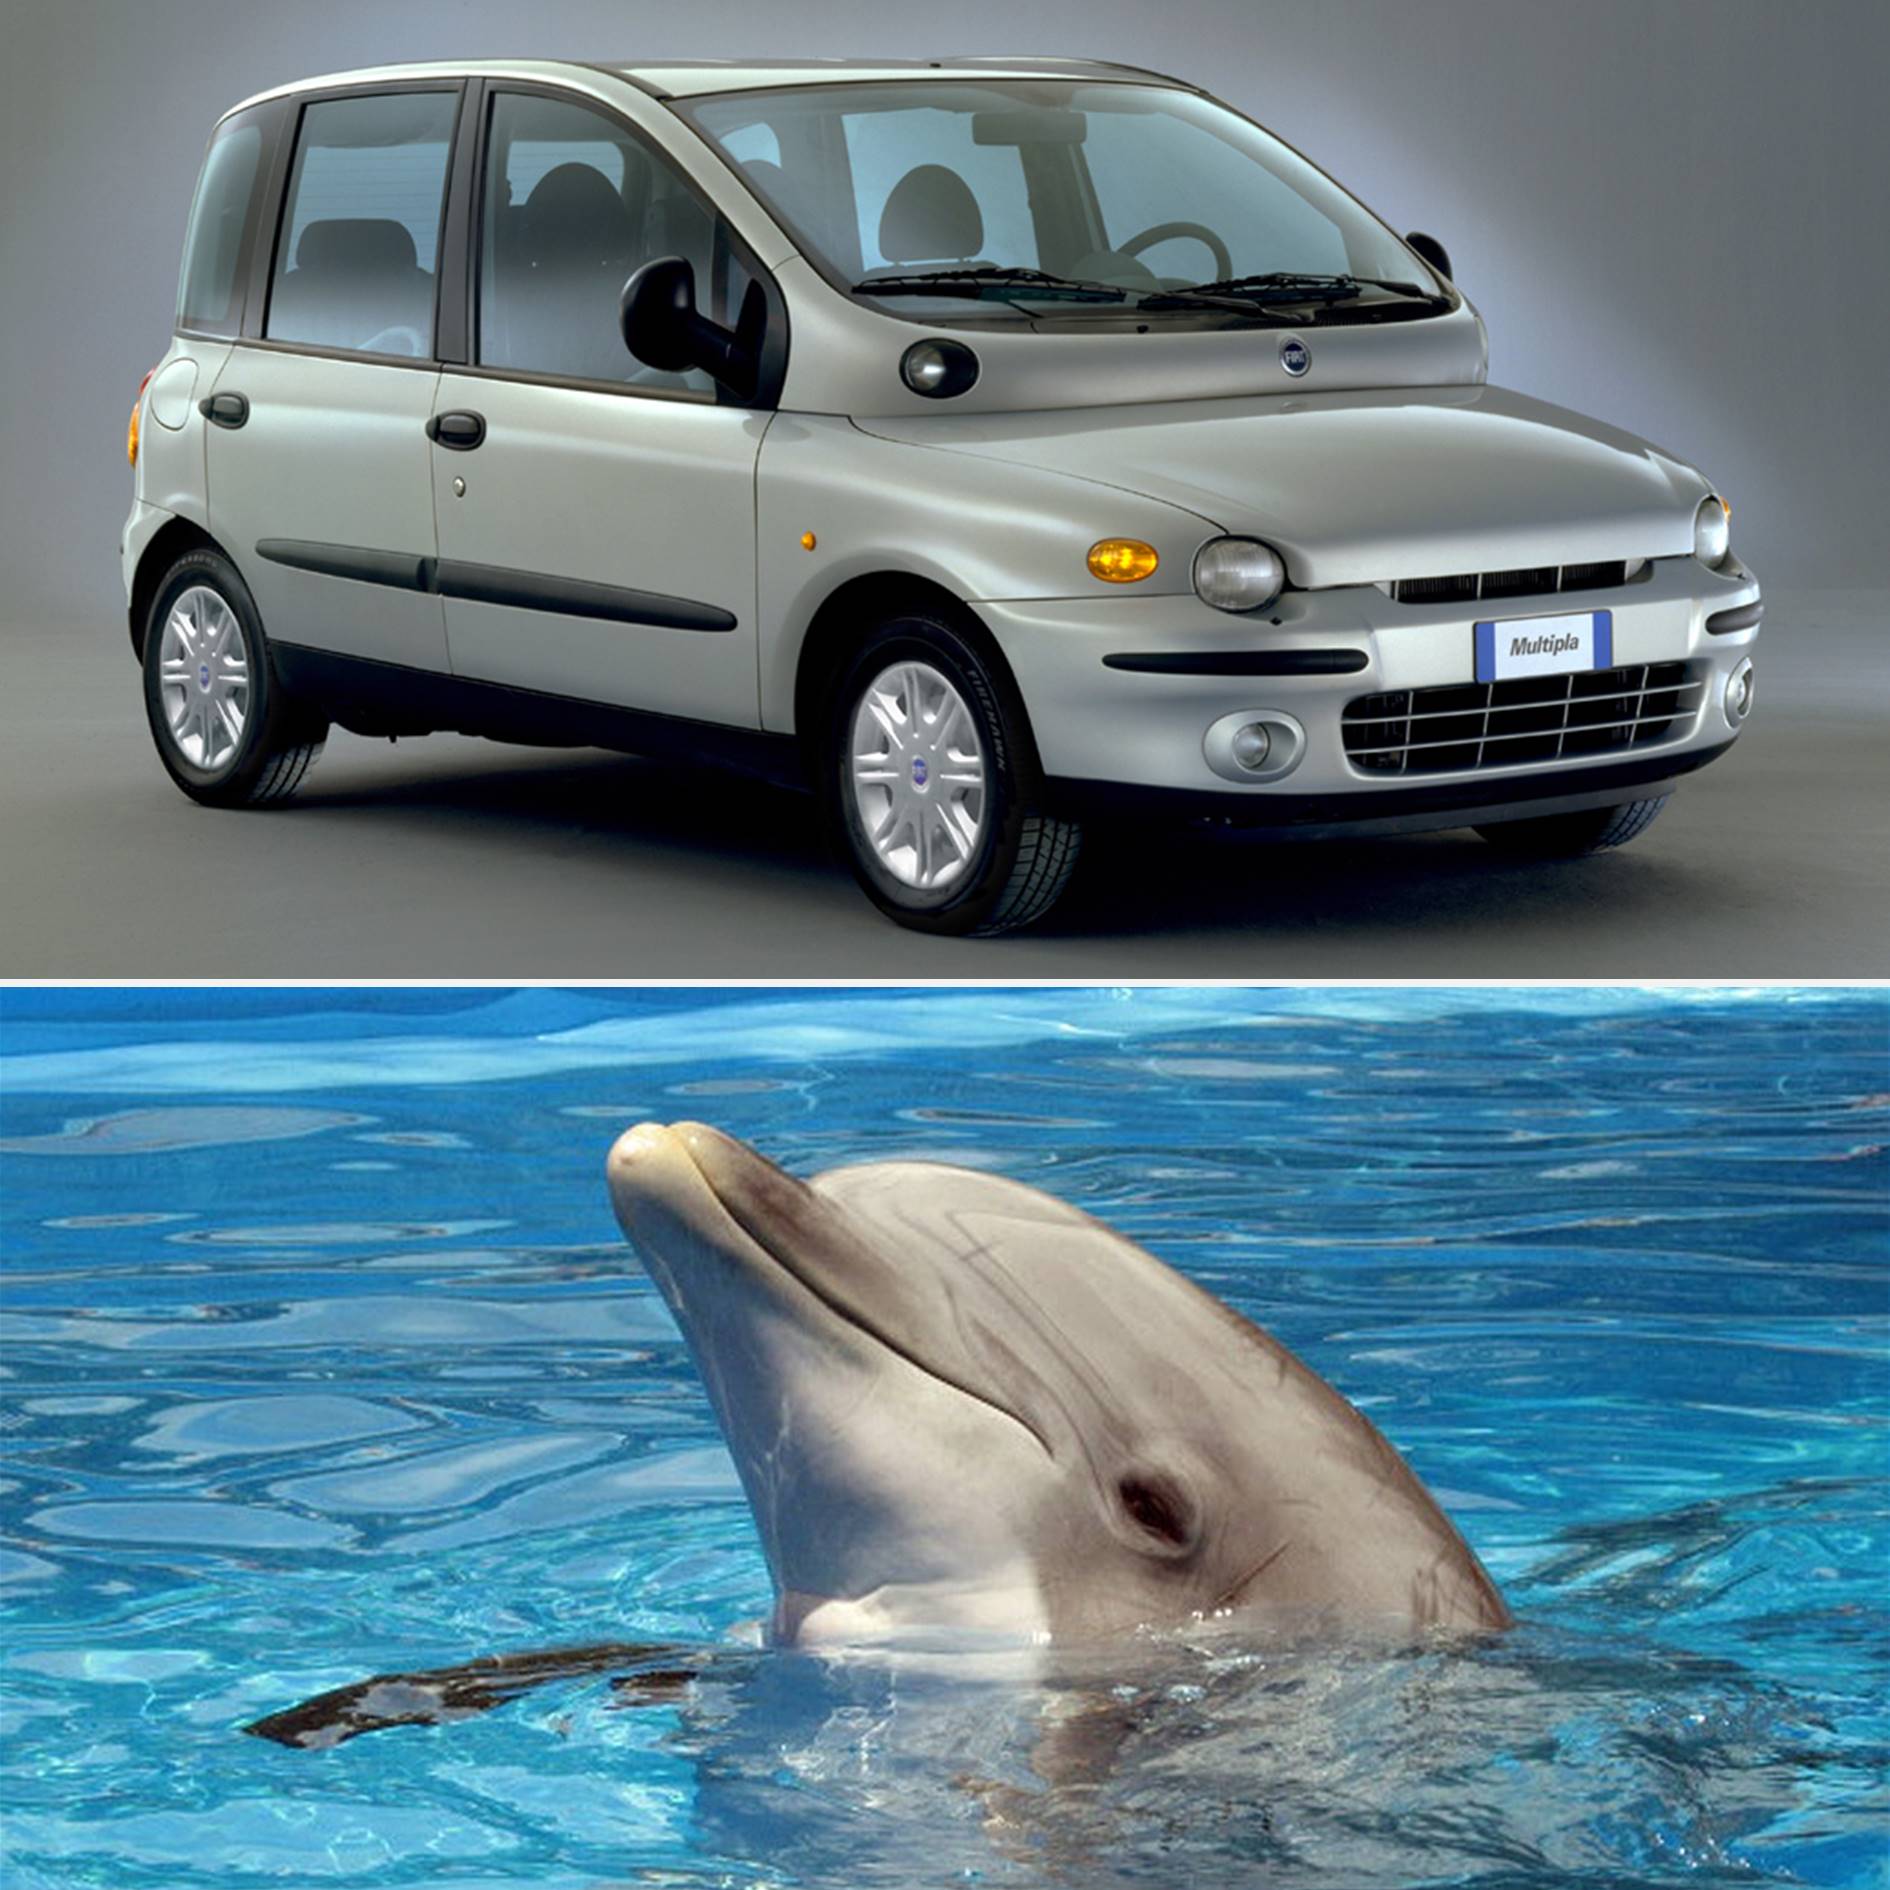 Fiat Multipla and a dolphin